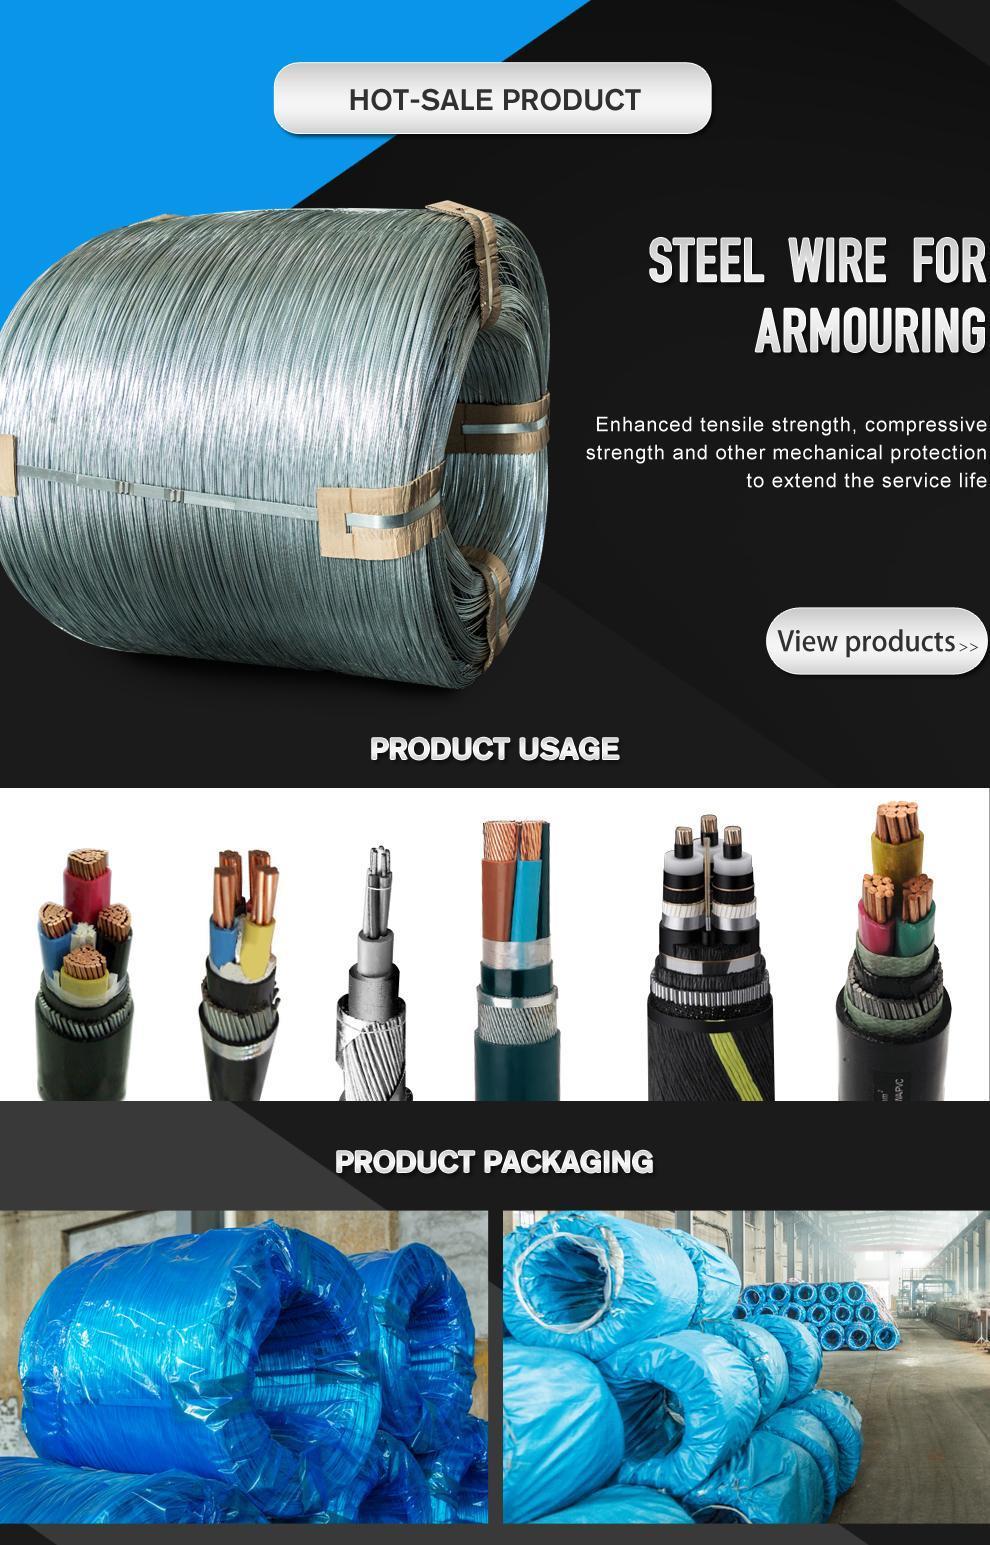 1.2mm Reinforced Steel Wire for Self-Supporting 2 Core Single Mode FTTH Fiber Optic Drop Cable